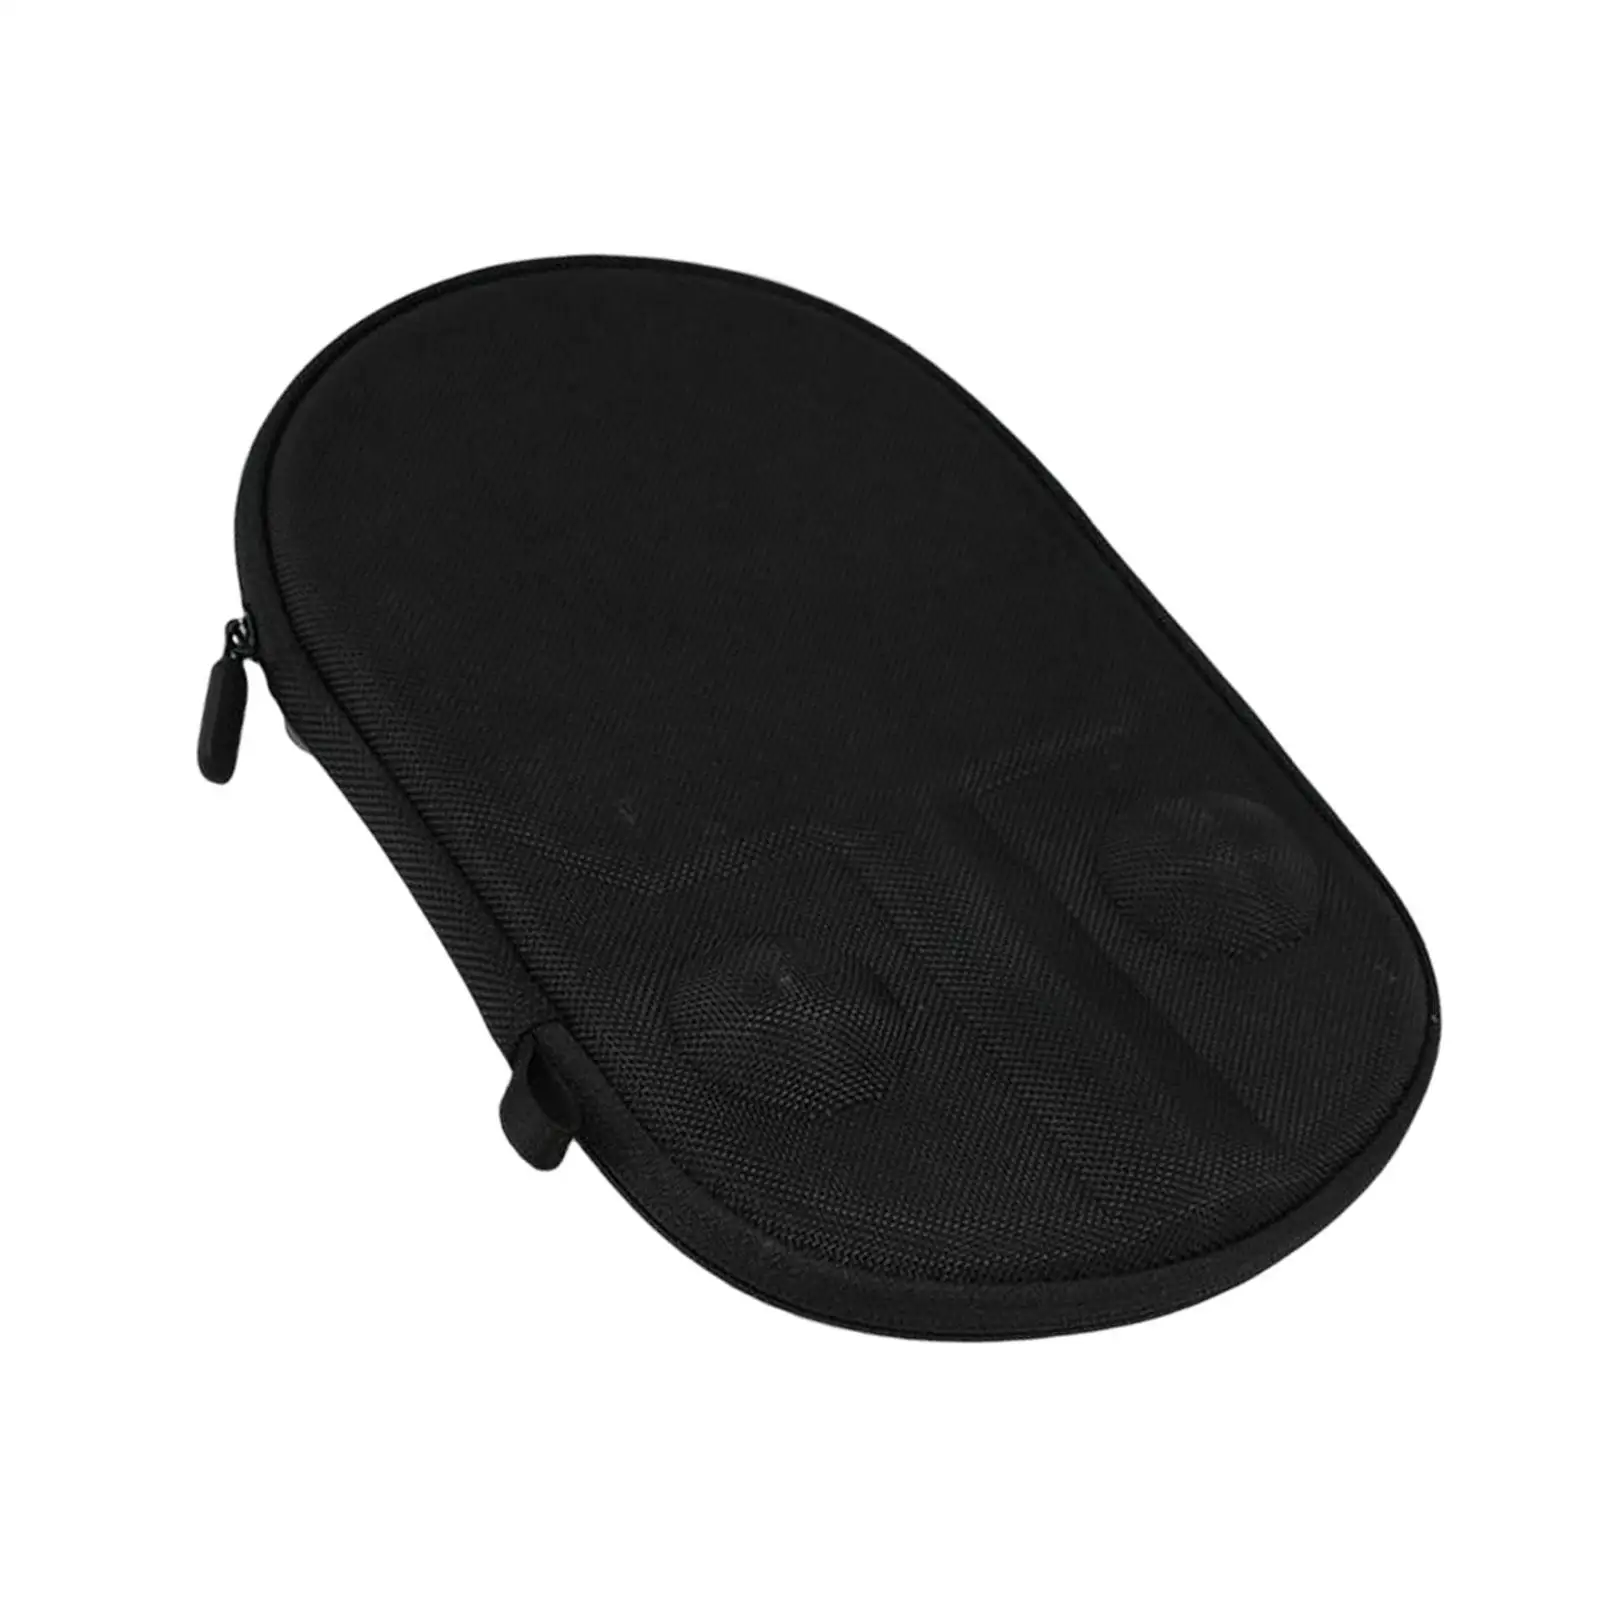 Portable Table Tennis Racket Bag Pong Paddle Bag Storage Case Hold 1 Racket and two balls Durable for Training Competition